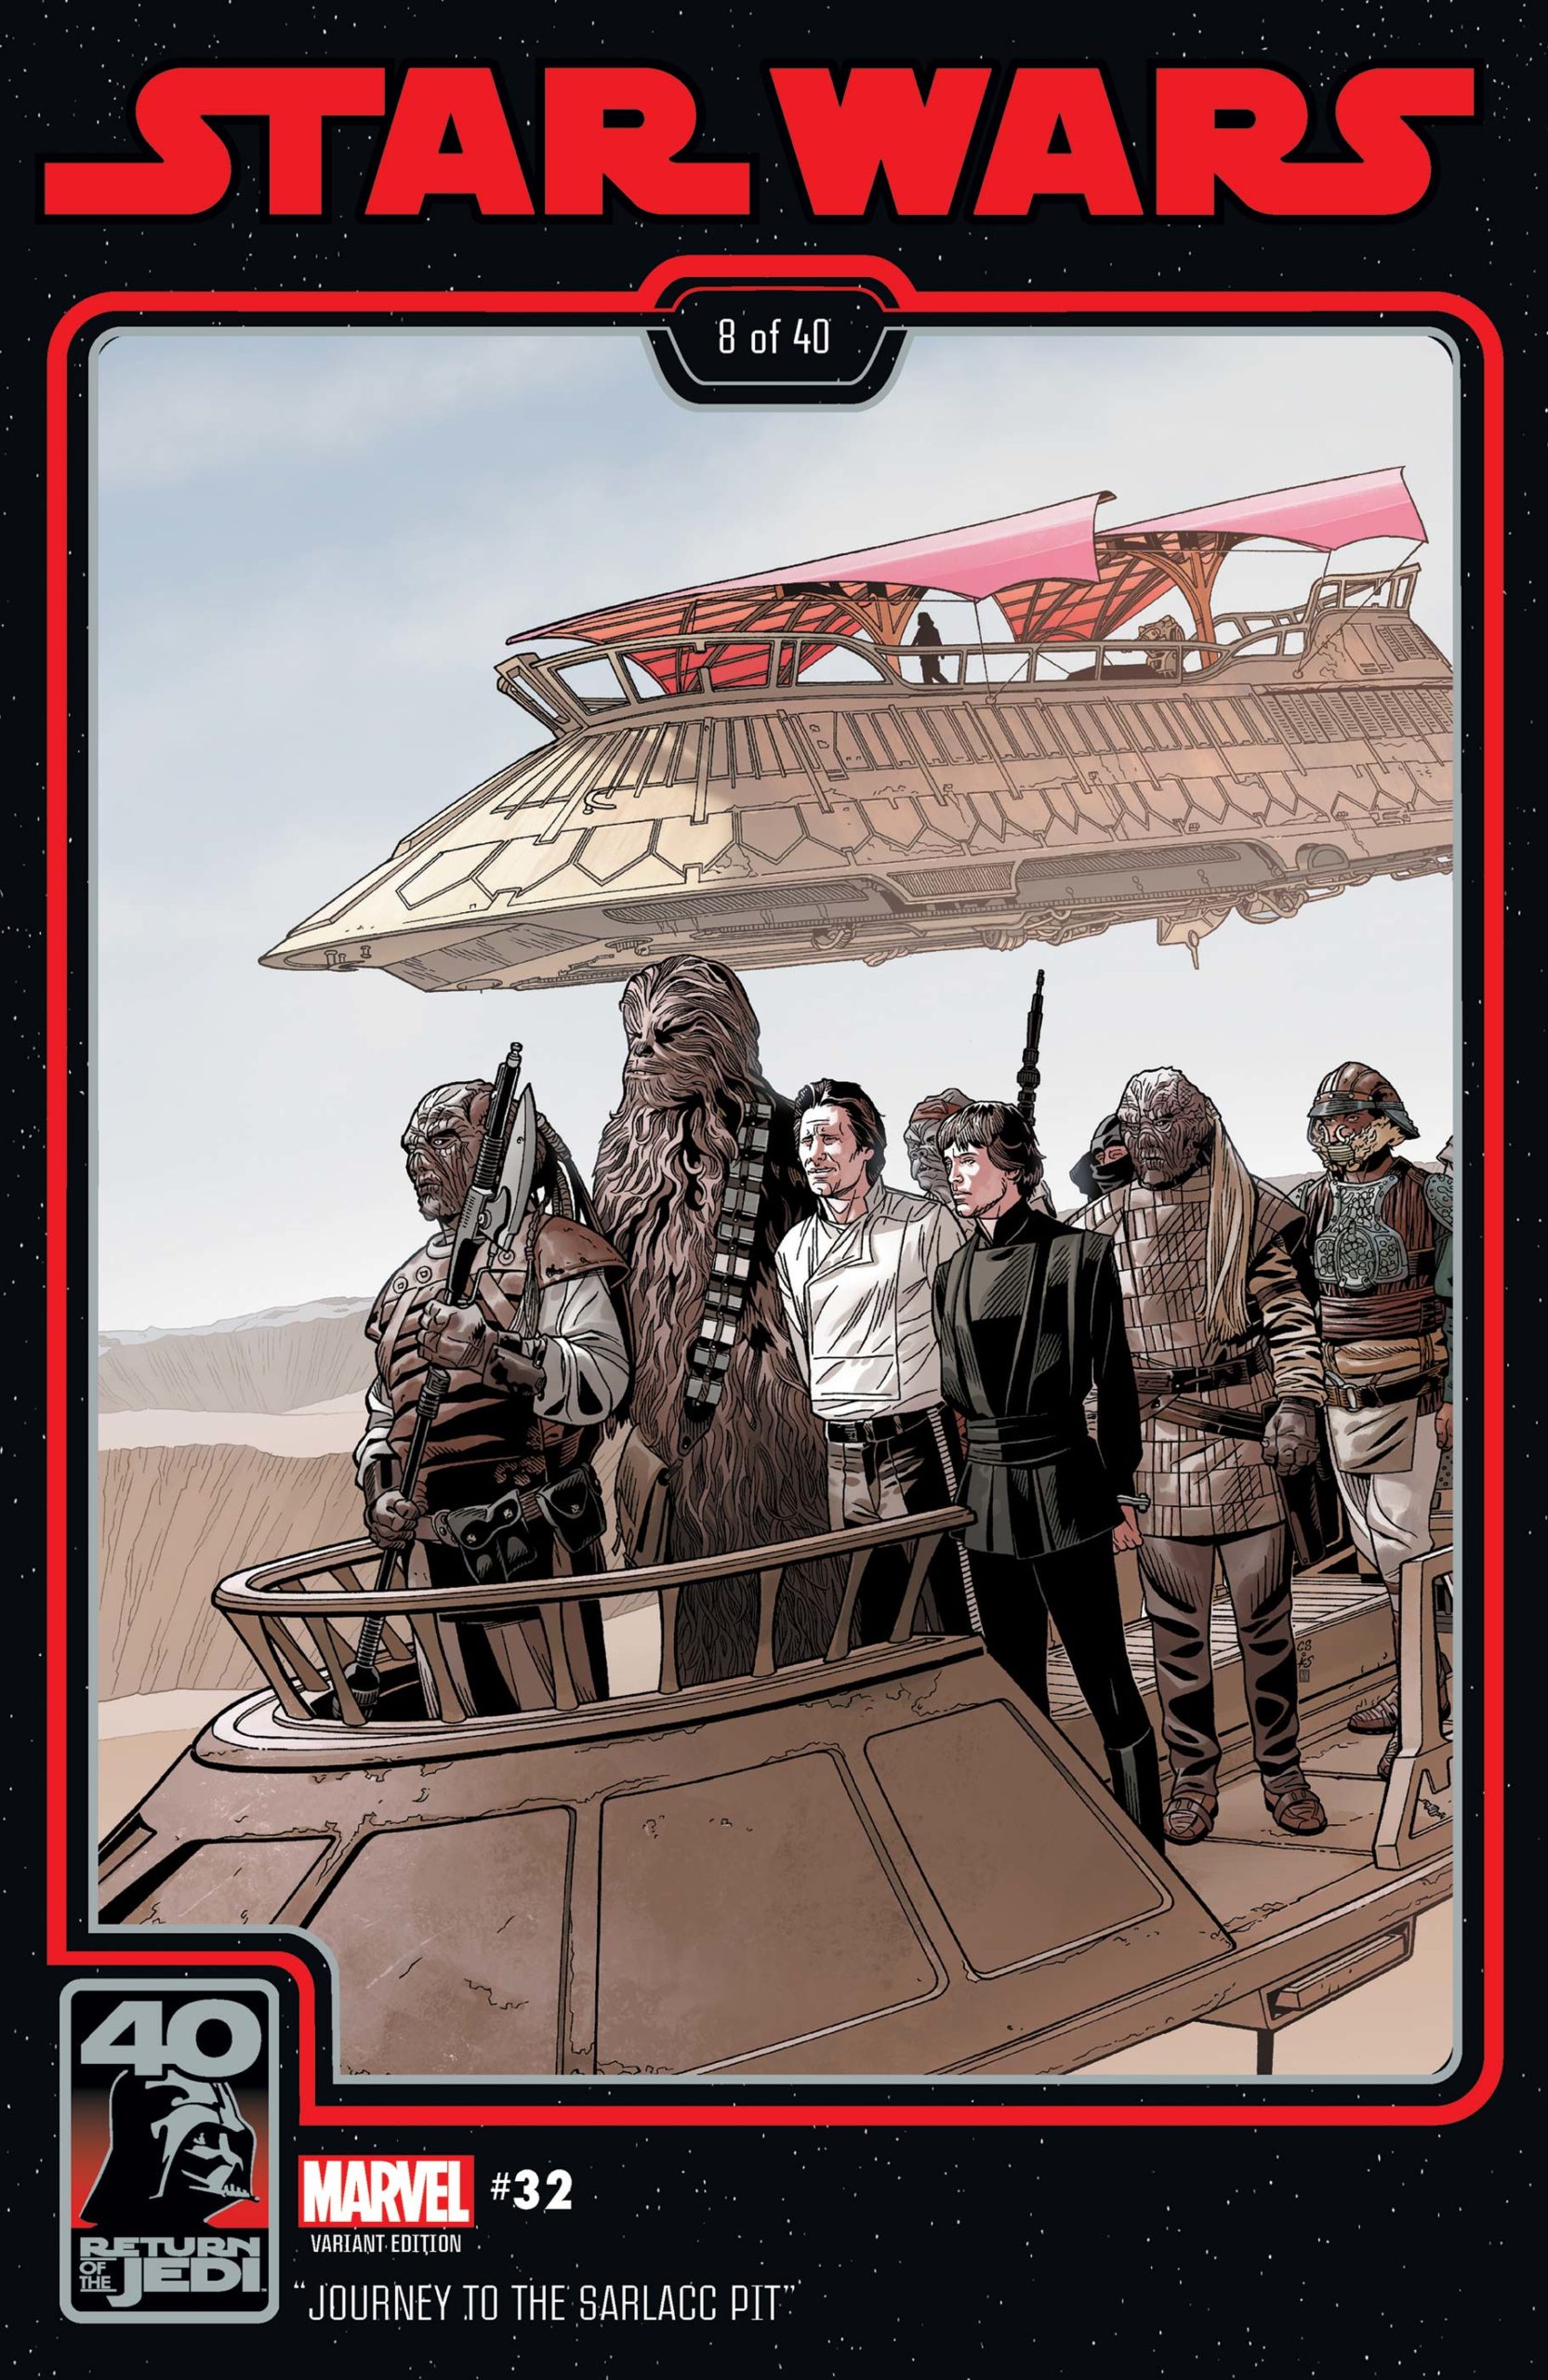 Star Wars #32 (Chris Sprouse Return of the Jedi 40th Anniversary Variant Cover) (01.03.2023)